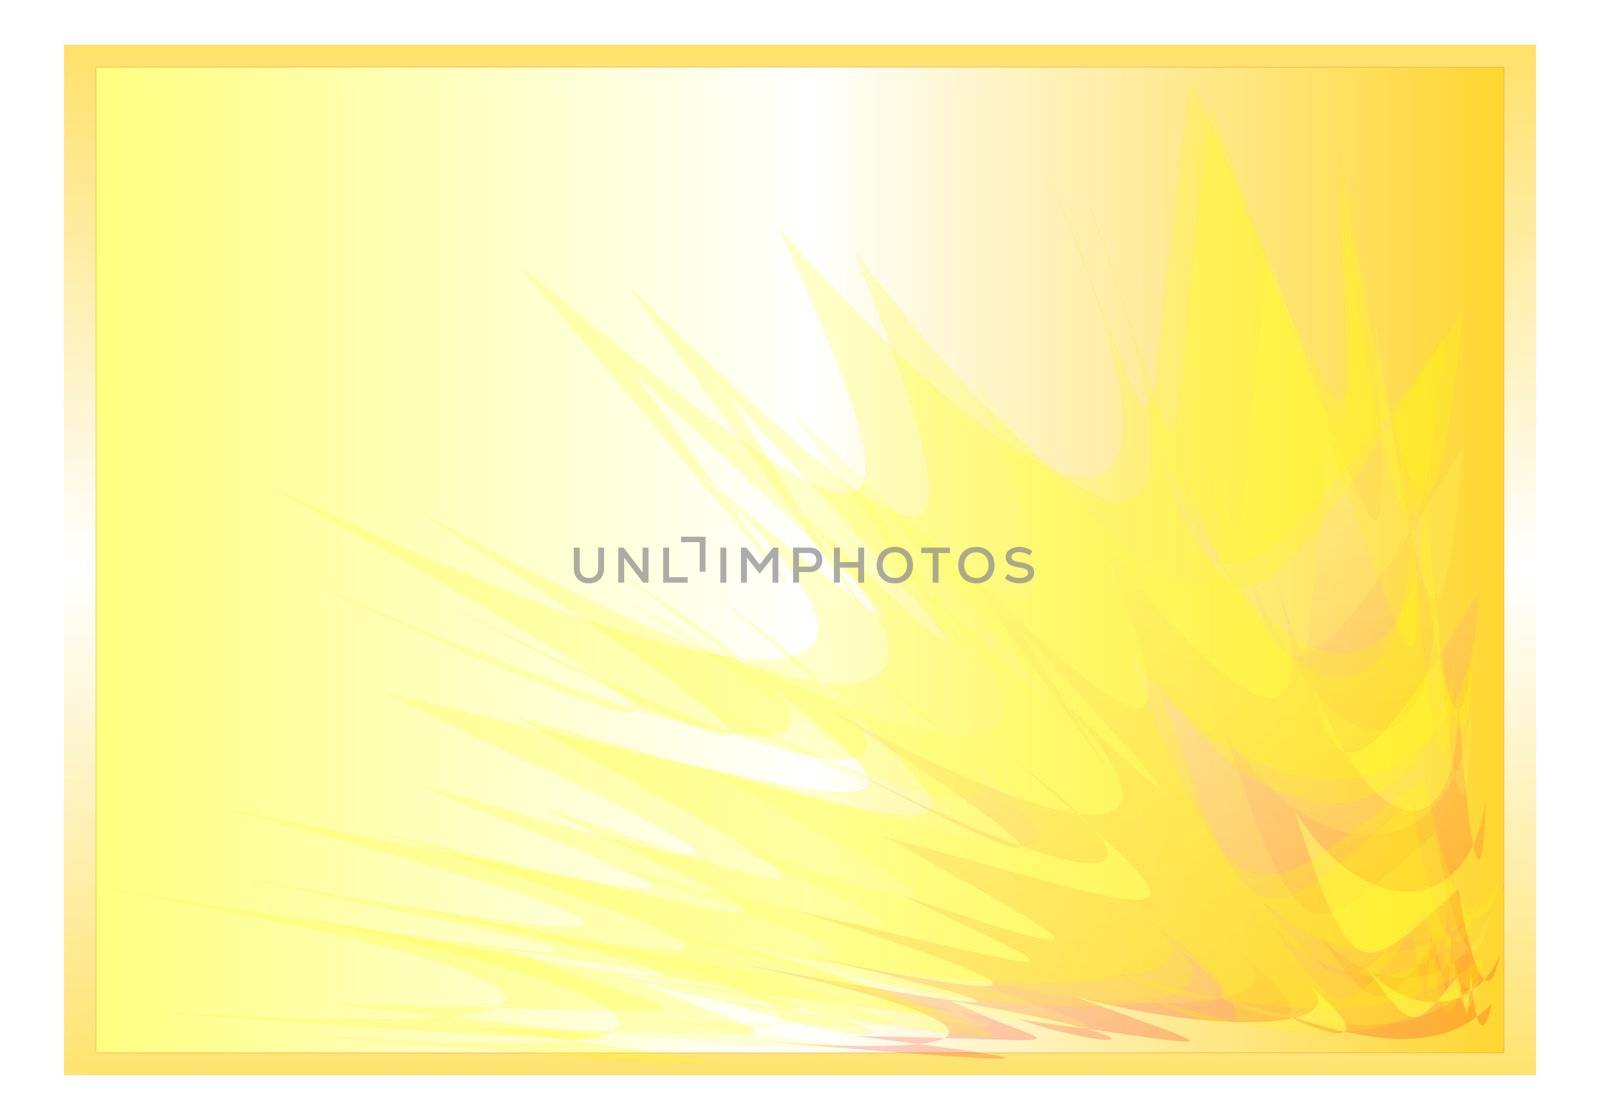 yellow background abstract rays